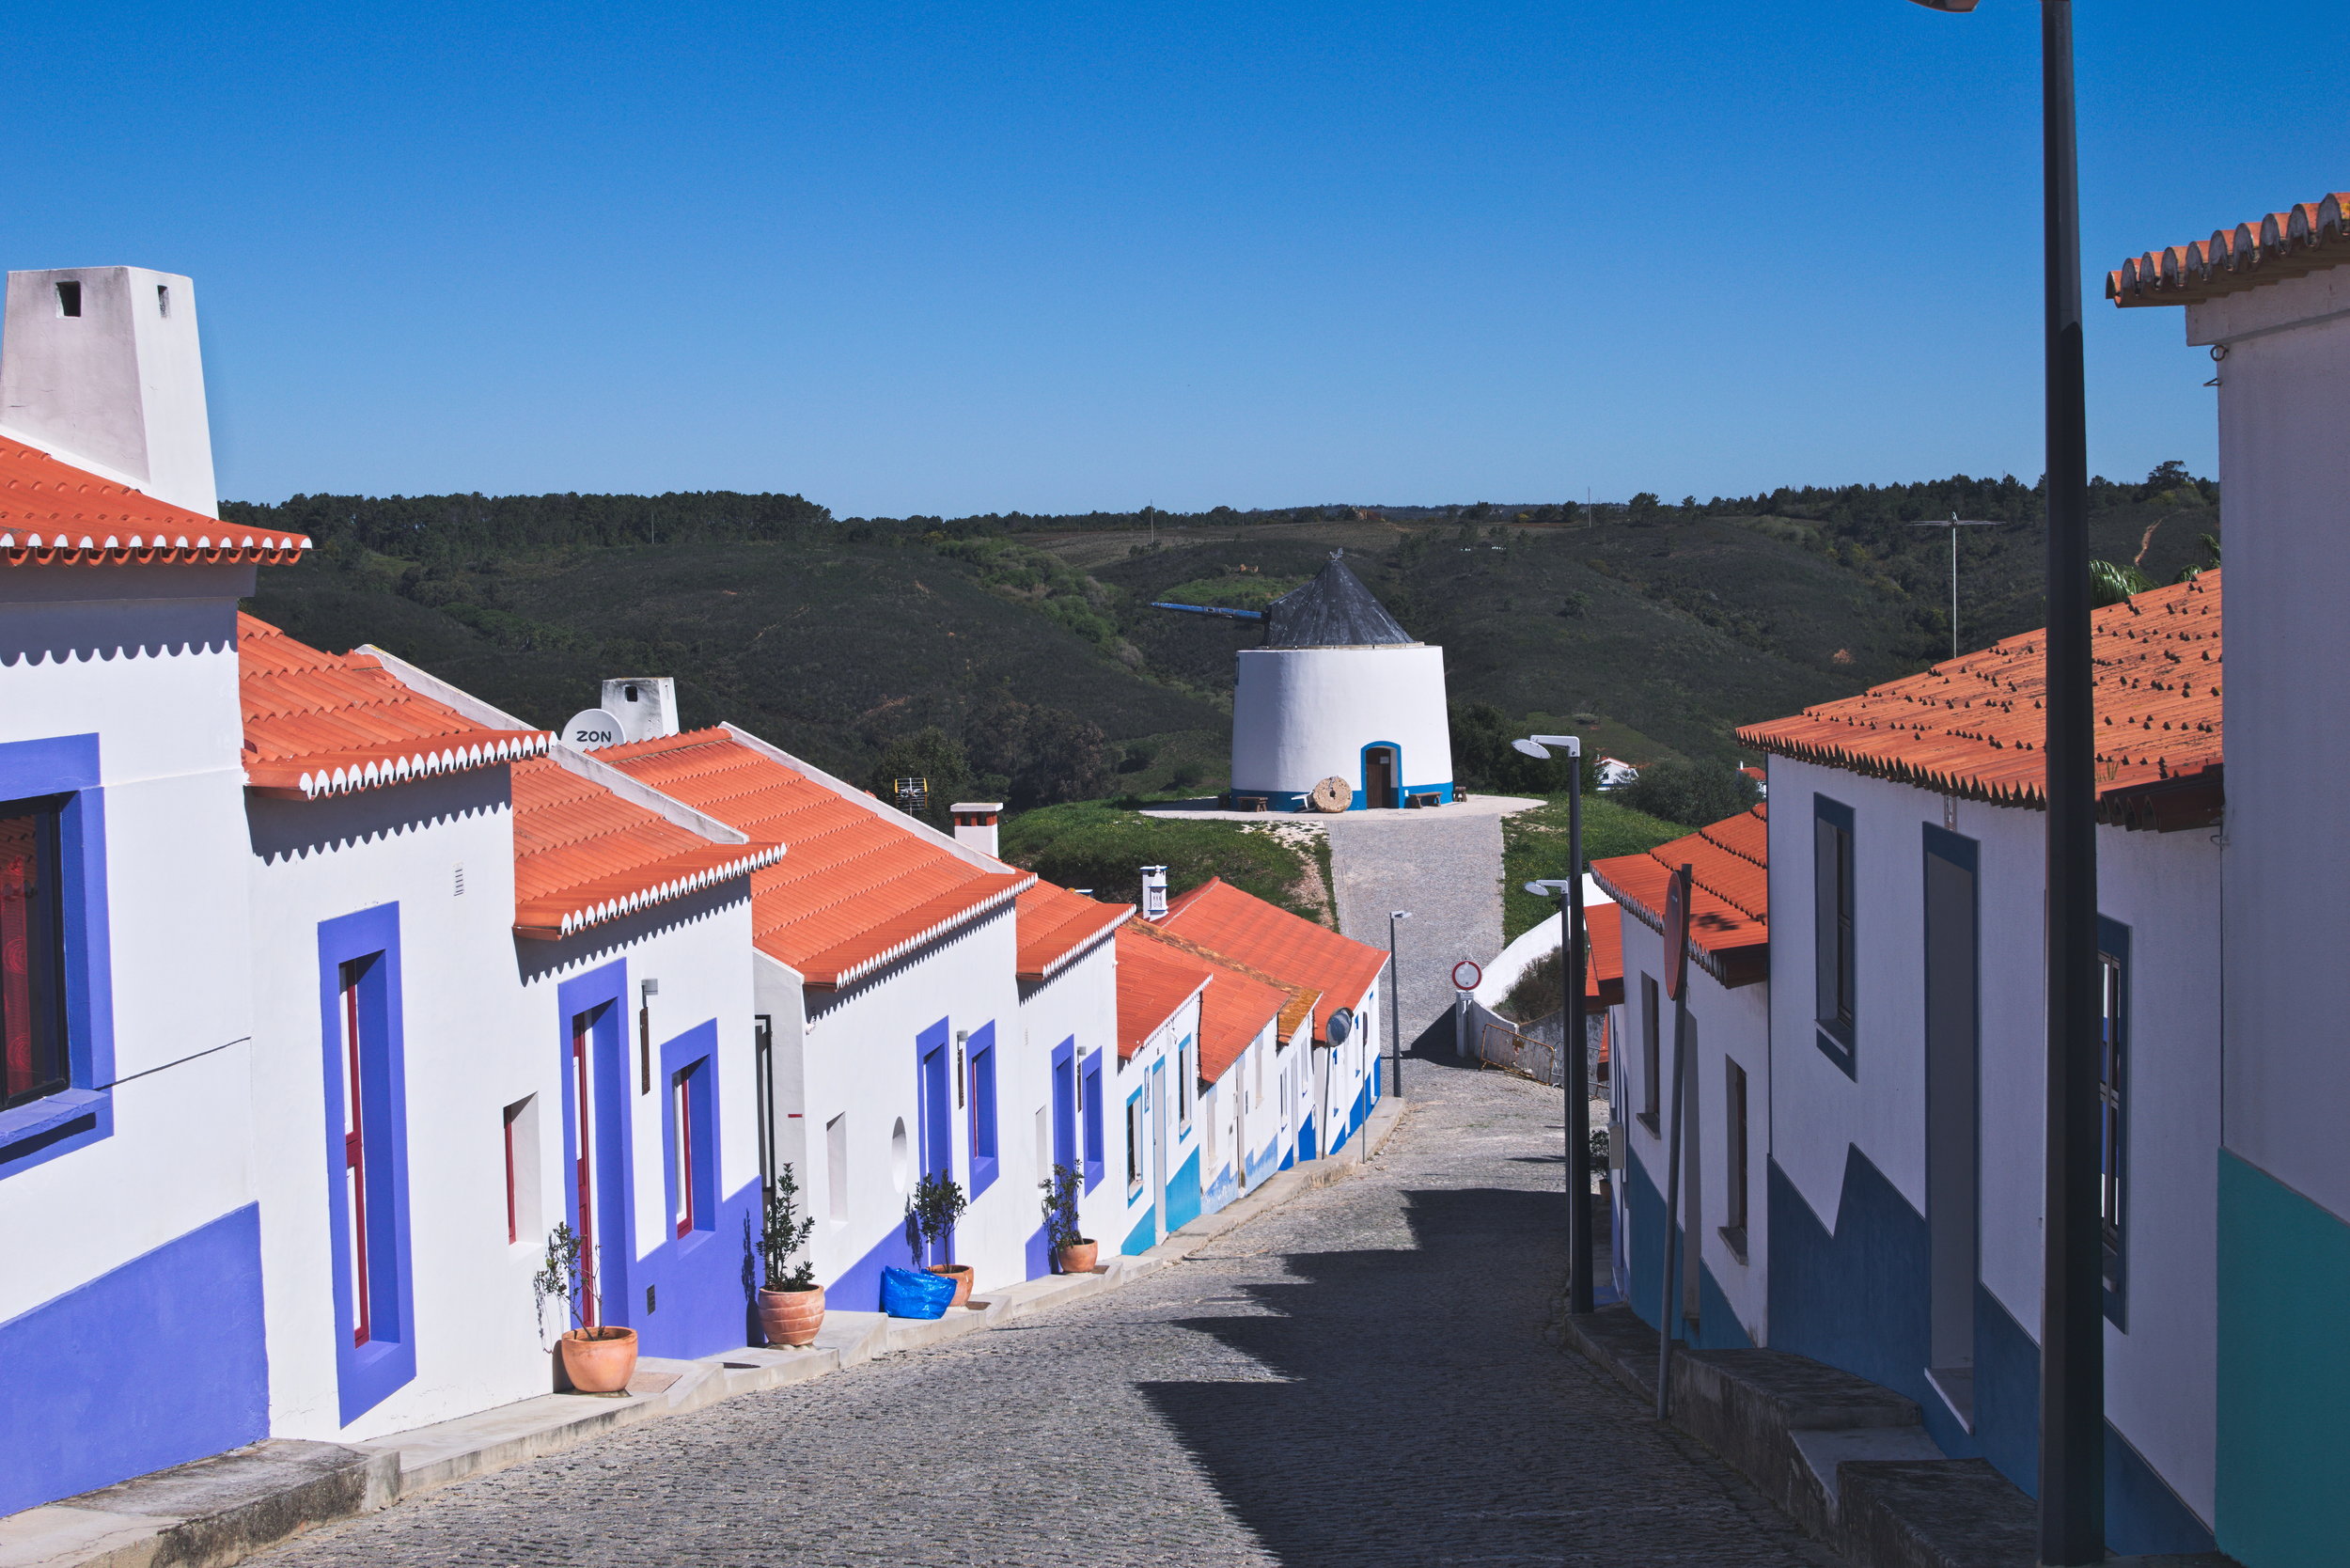  Portugal's towns were very bright and colorful, as Odeceixe demontrates here.&nbsp; 